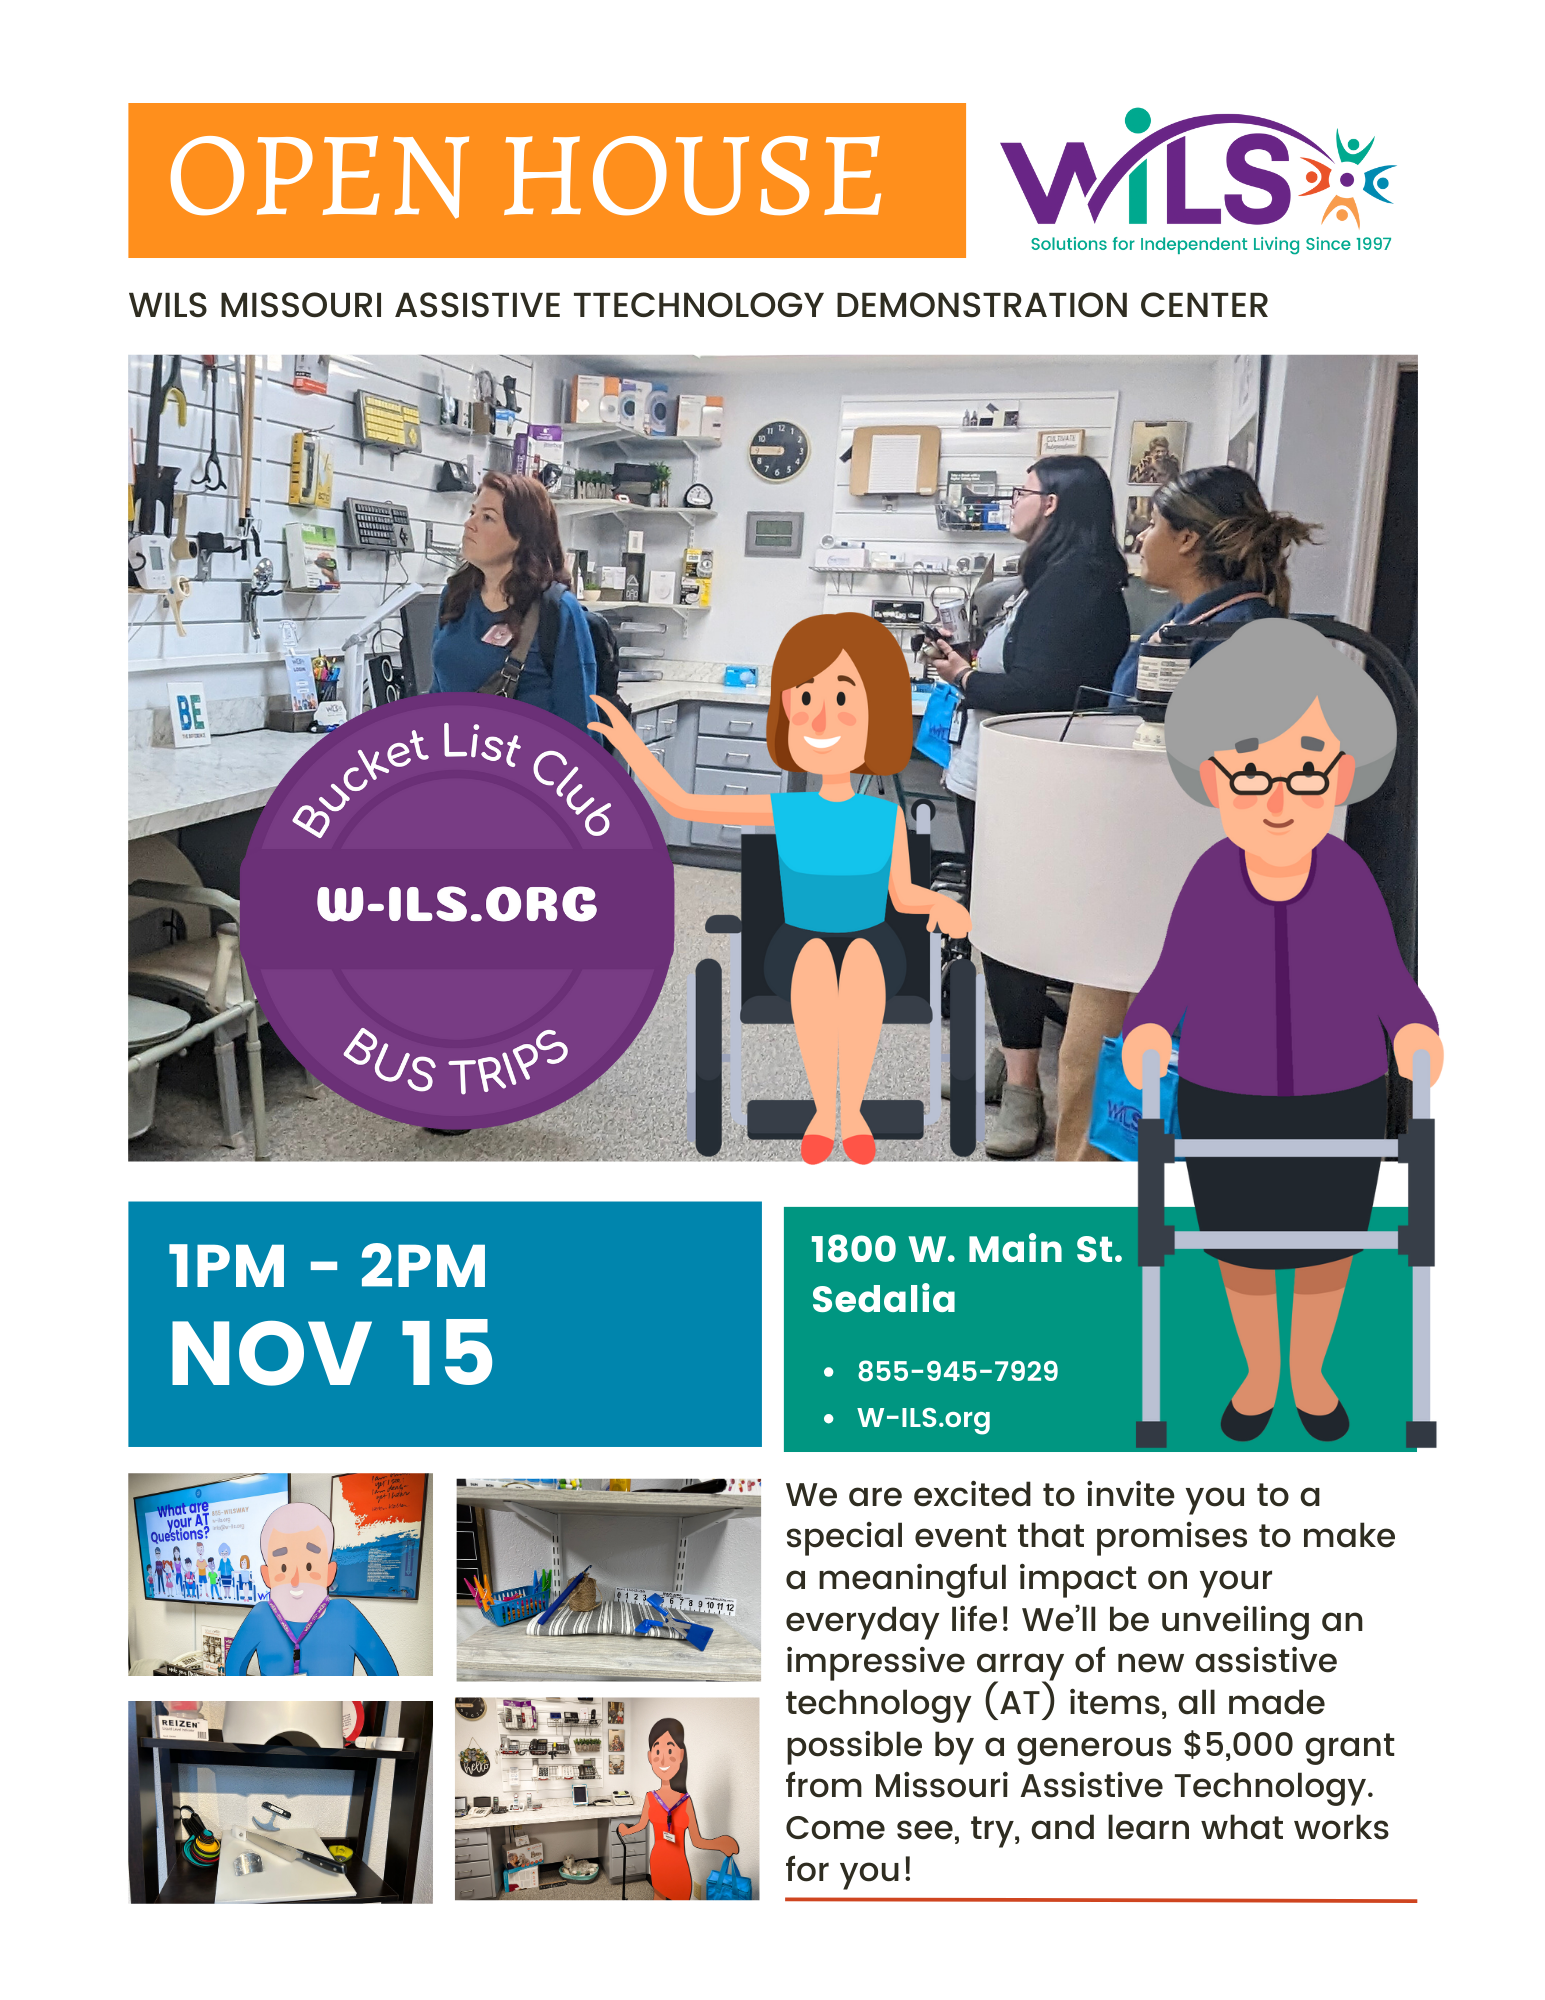 OPEN HOUSE 1PM - 2PM NOV 15 WILS MISSOURI ASSISTIVE TTECHNOLOGY DEMONSTRATION CENTER 1800 W. Main St.Sedalia We are excited to invite you to aspecial event that promises to makea meaningful impact on youreveryday life! We’ll be unveiling animpressive array of new assistivetechnology (AT) items, all madepossible by a generous $5,000 grantfrom Missouri Assistive Technology. Come see, try, and learn what works for you!